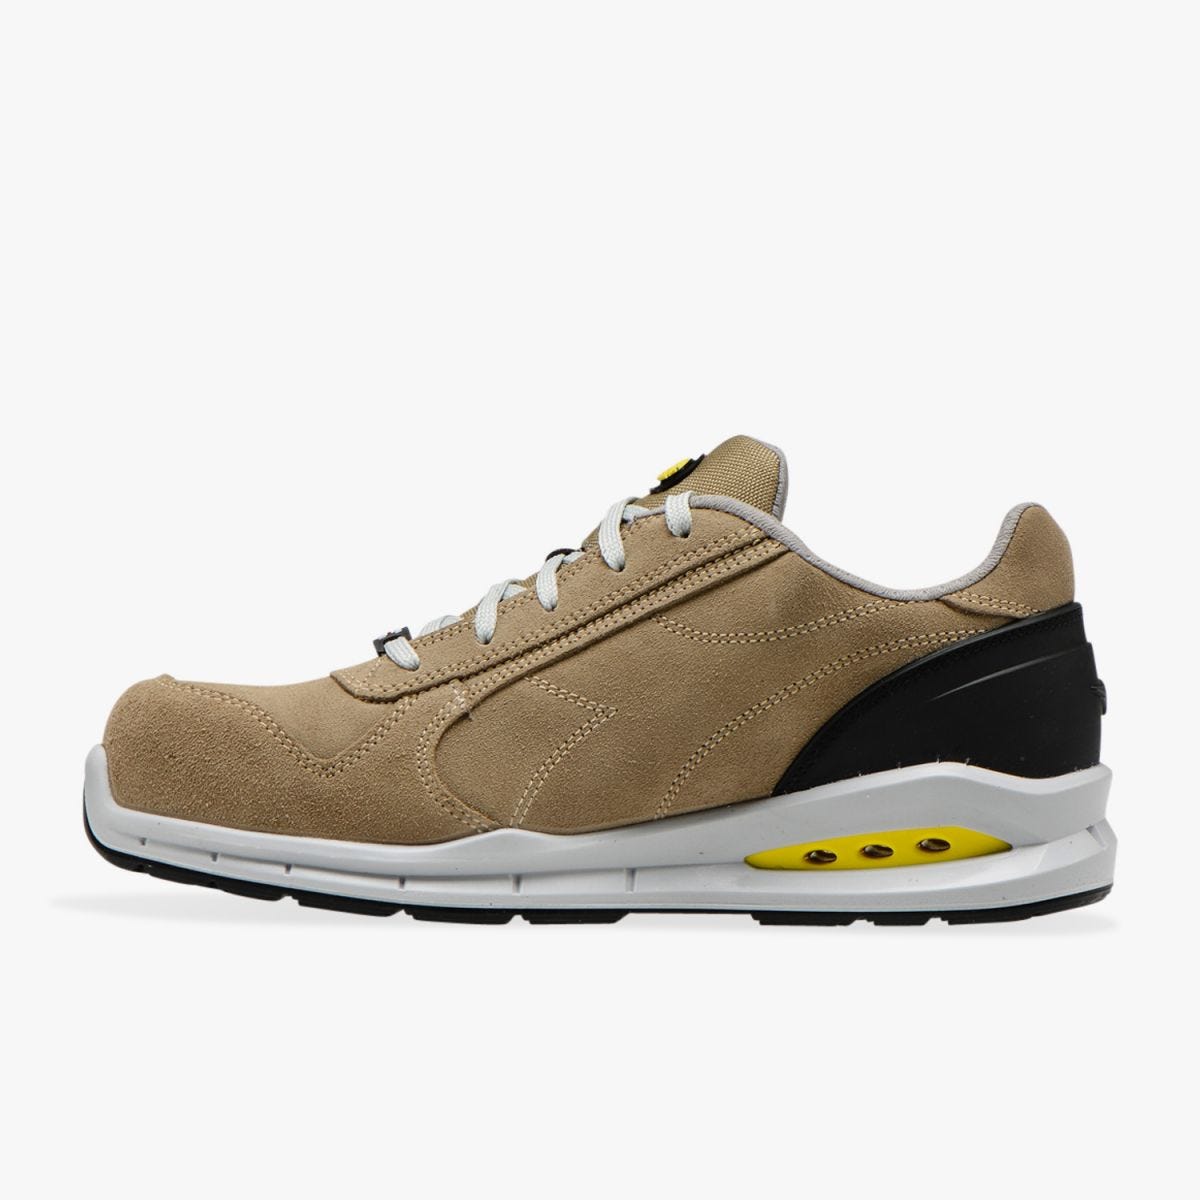 CHAUSSURE SECURITE RUN NET AIRBOX LOW S3 SRC TAUPE/TAUPE - Diadora - Taille 42 1